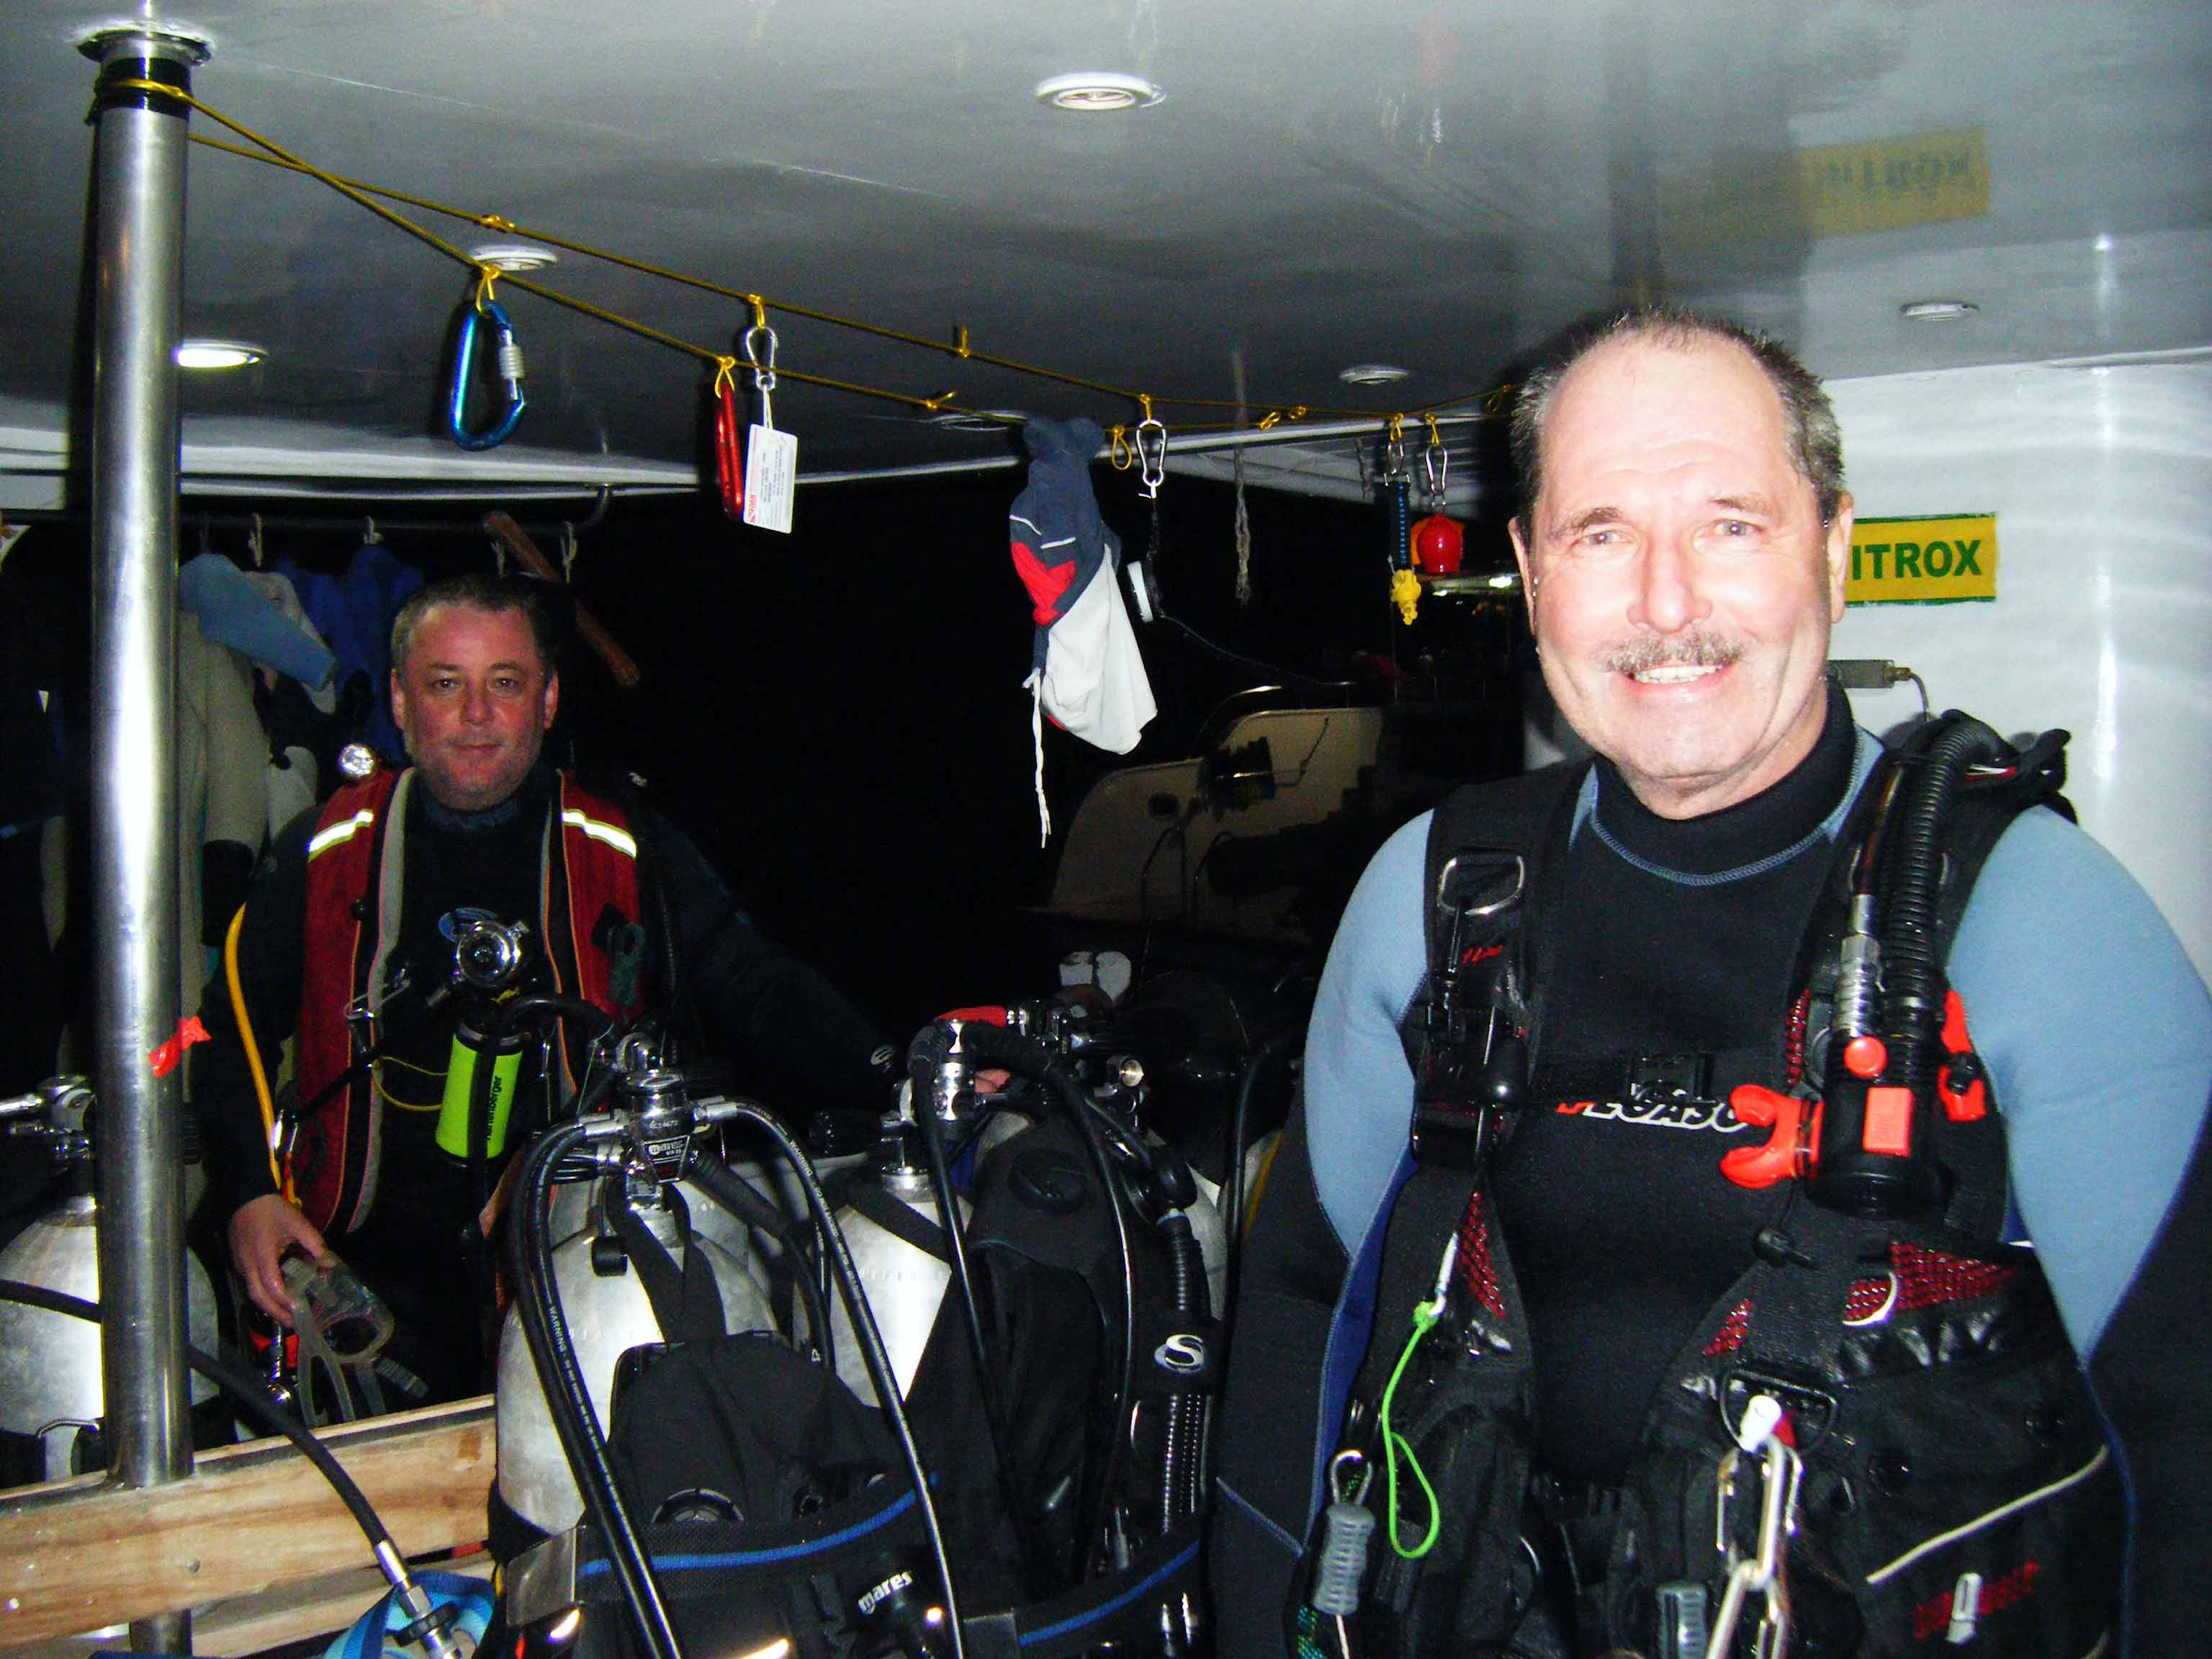 Night diving in the Red Sea